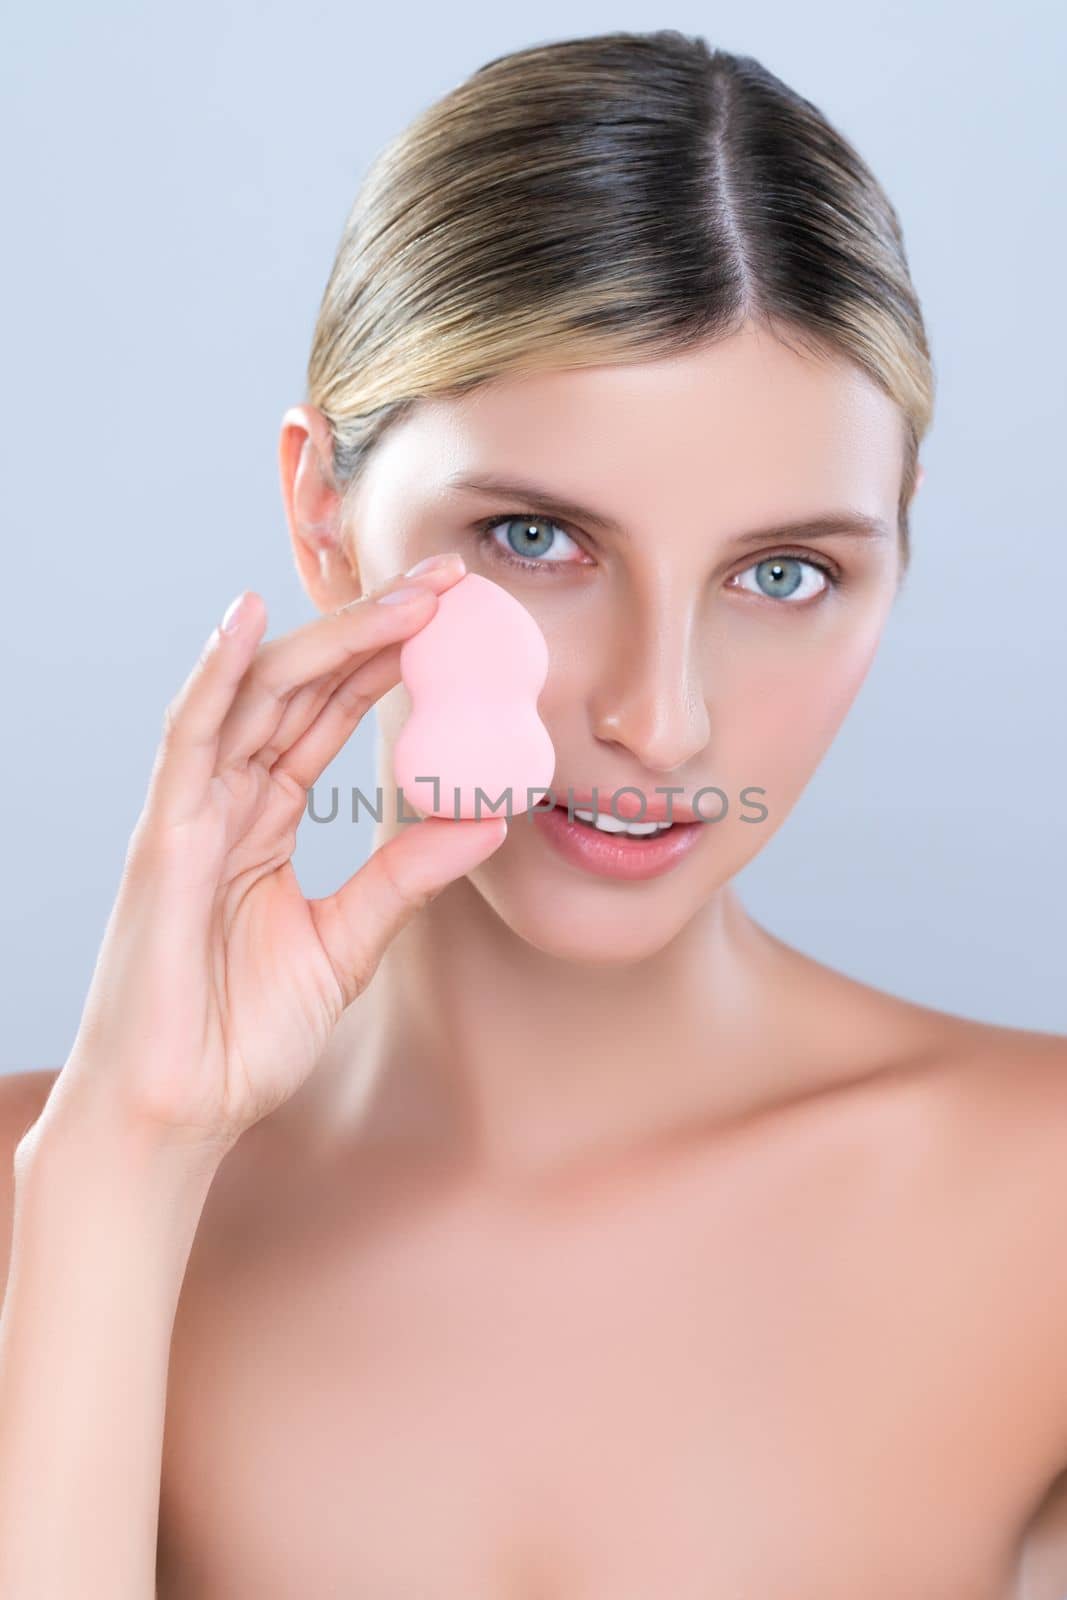 Alluring beautiful female model applying powder puff for facial makeup concept. Portrait of flawless perfect cosmetic skin woman put powder foundation on her face in isolated background.